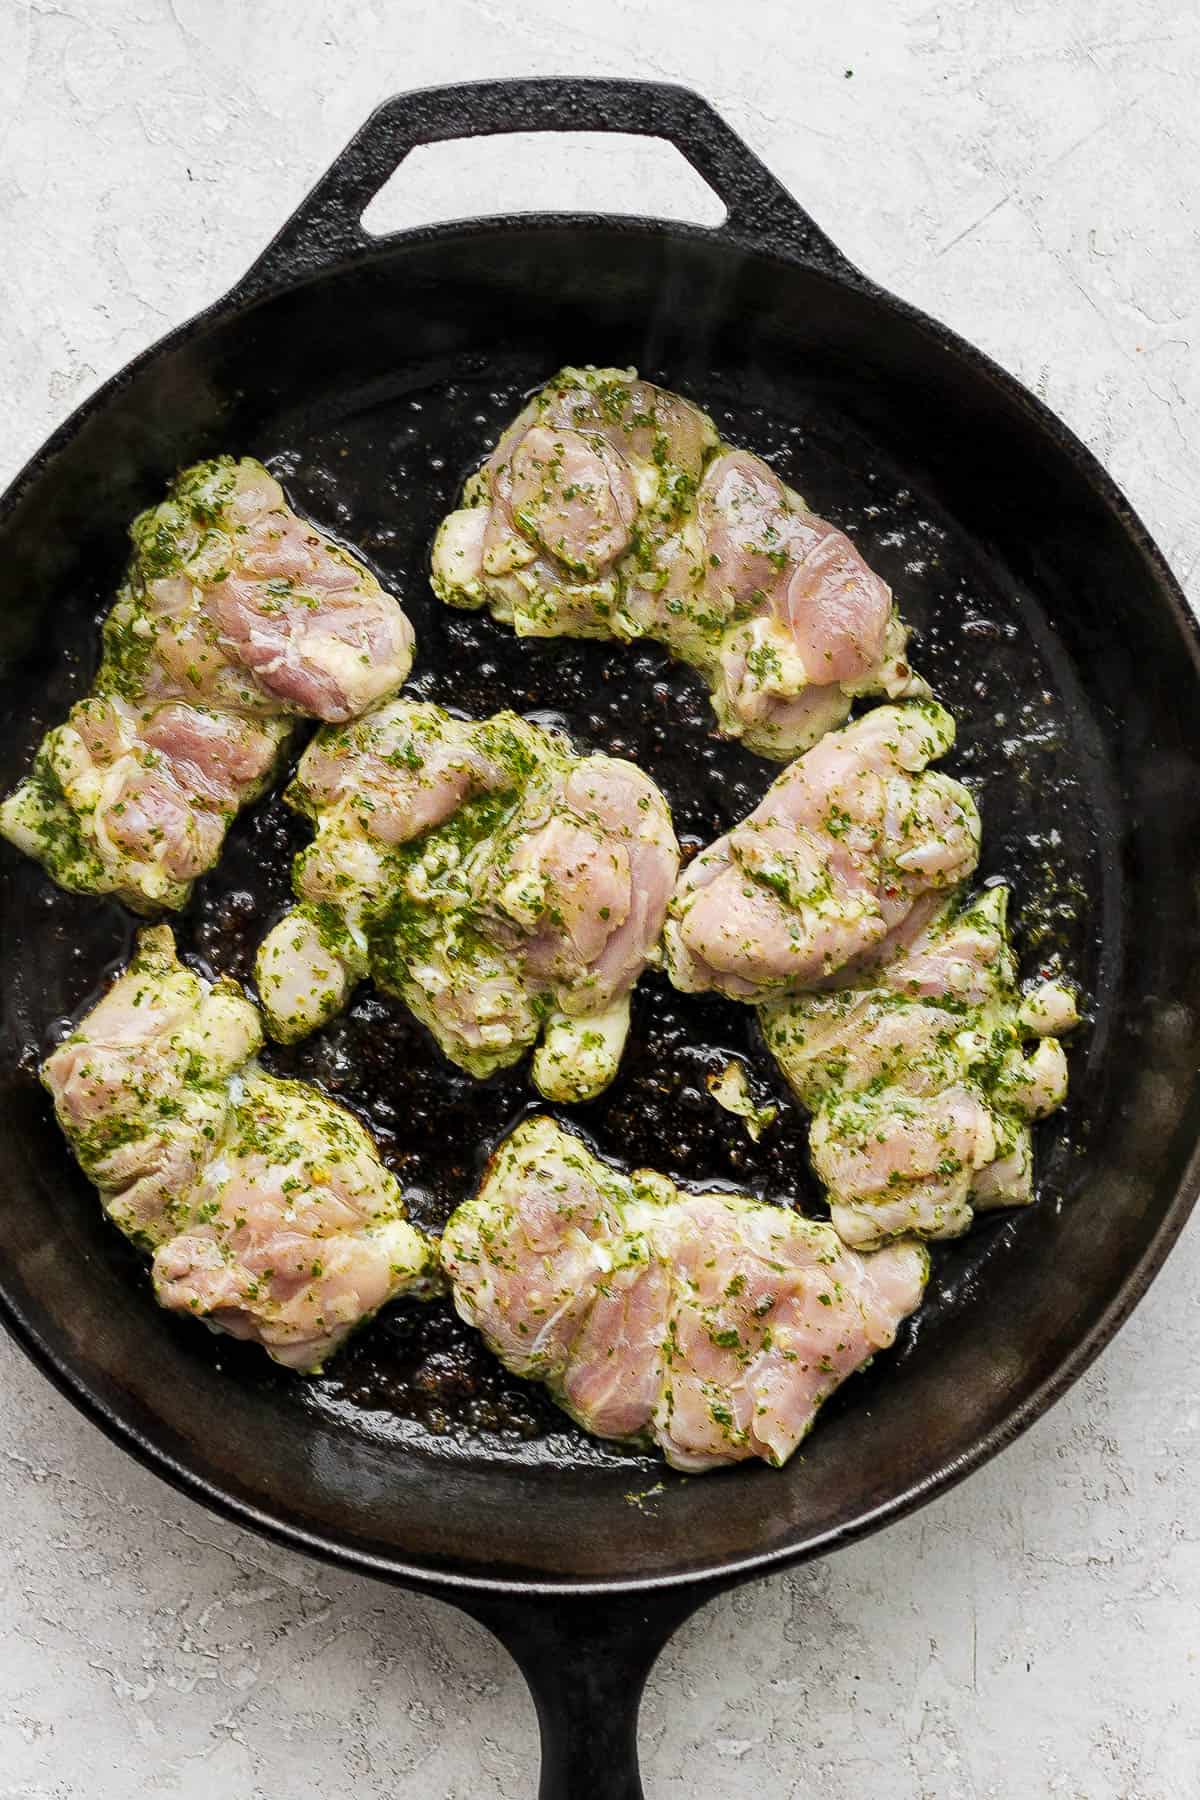 Marinated chimichurri chicken thighs being cooked in a cast iron skillet.